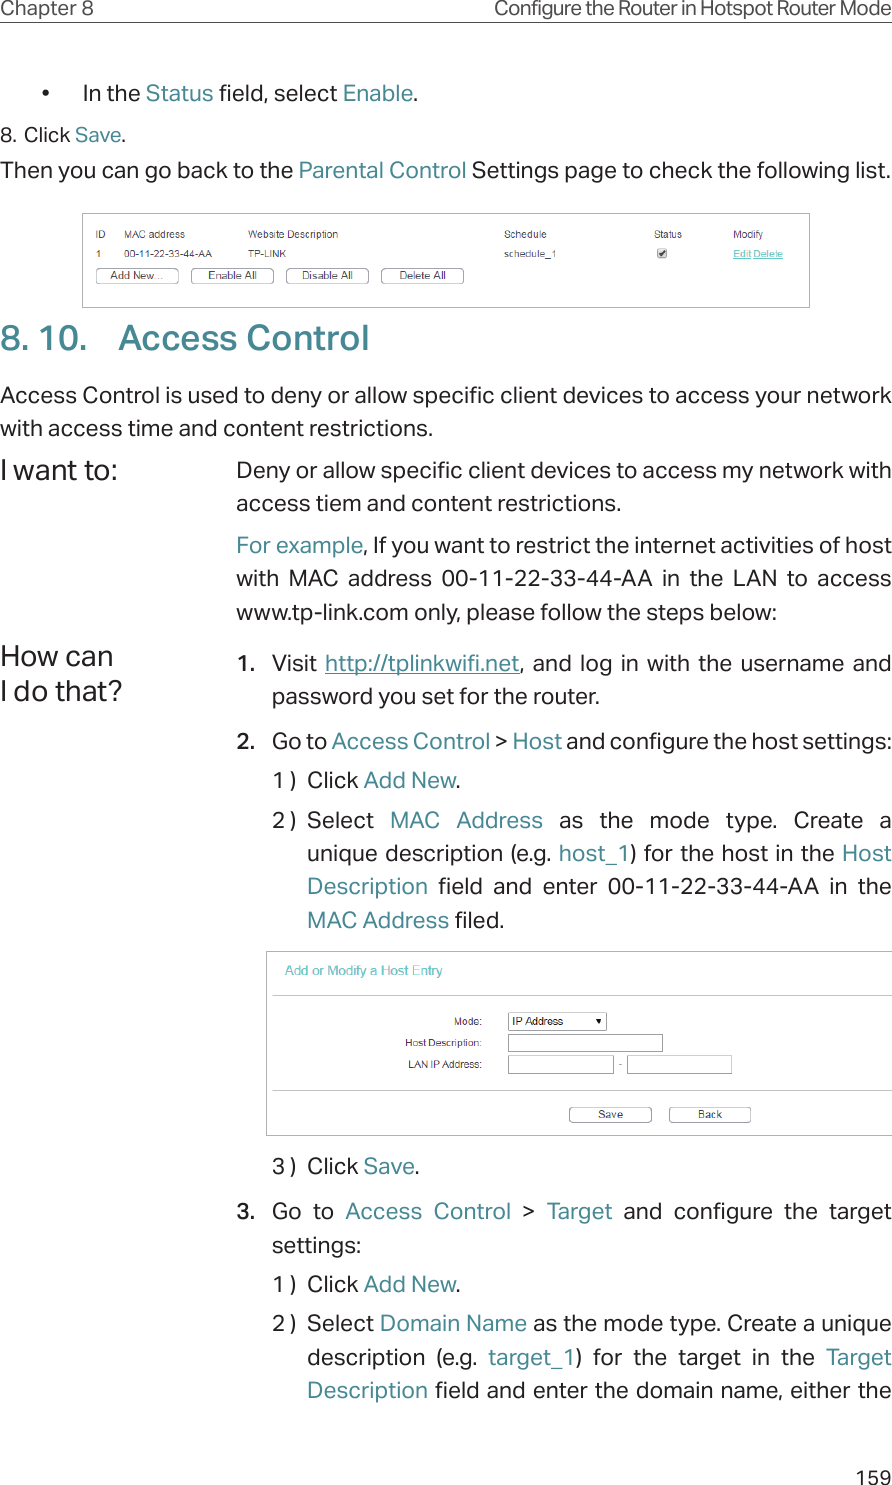 159Chapter 8 Configure the Router in Hotspot Router Mode•  In the Status field, select Enable. 8. Click Save.Then you can go back to the Parental Control Settings page to check the following list.8. 10.  Access ControlAccess Control is used to deny or allow specific client devices to access your network with access time and content restrictions.Deny or allow specific client devices to access my network with access tiem and content restrictions.For example, If you want to restrict the internet activities of host with MAC address 00-11-22-33-44-AA in the LAN to access www.tp-link.com only, please follow the steps below:1.  Visit  http://tplinkwifi.net, and log in with the username and password you set for the router.2.  Go to Access Control &gt; Host and configure the host settings:1 )  Click Add New.2 )  Select  MAC Address as the mode type. Create a unique description (e.g. host_1) for the host in the Host Description field and enter 00-11-22-33-44-AA in the MAC Address filed.3 )  Click Save.3.  Go to Access Control &gt; Target and configure the target settings:1 )  Click Add New.2 )  Select Domain Name as the mode type. Create a unique description (e.g. target_1) for the target in the Target Description field and enter the domain name, either the I want to:How can I do that?